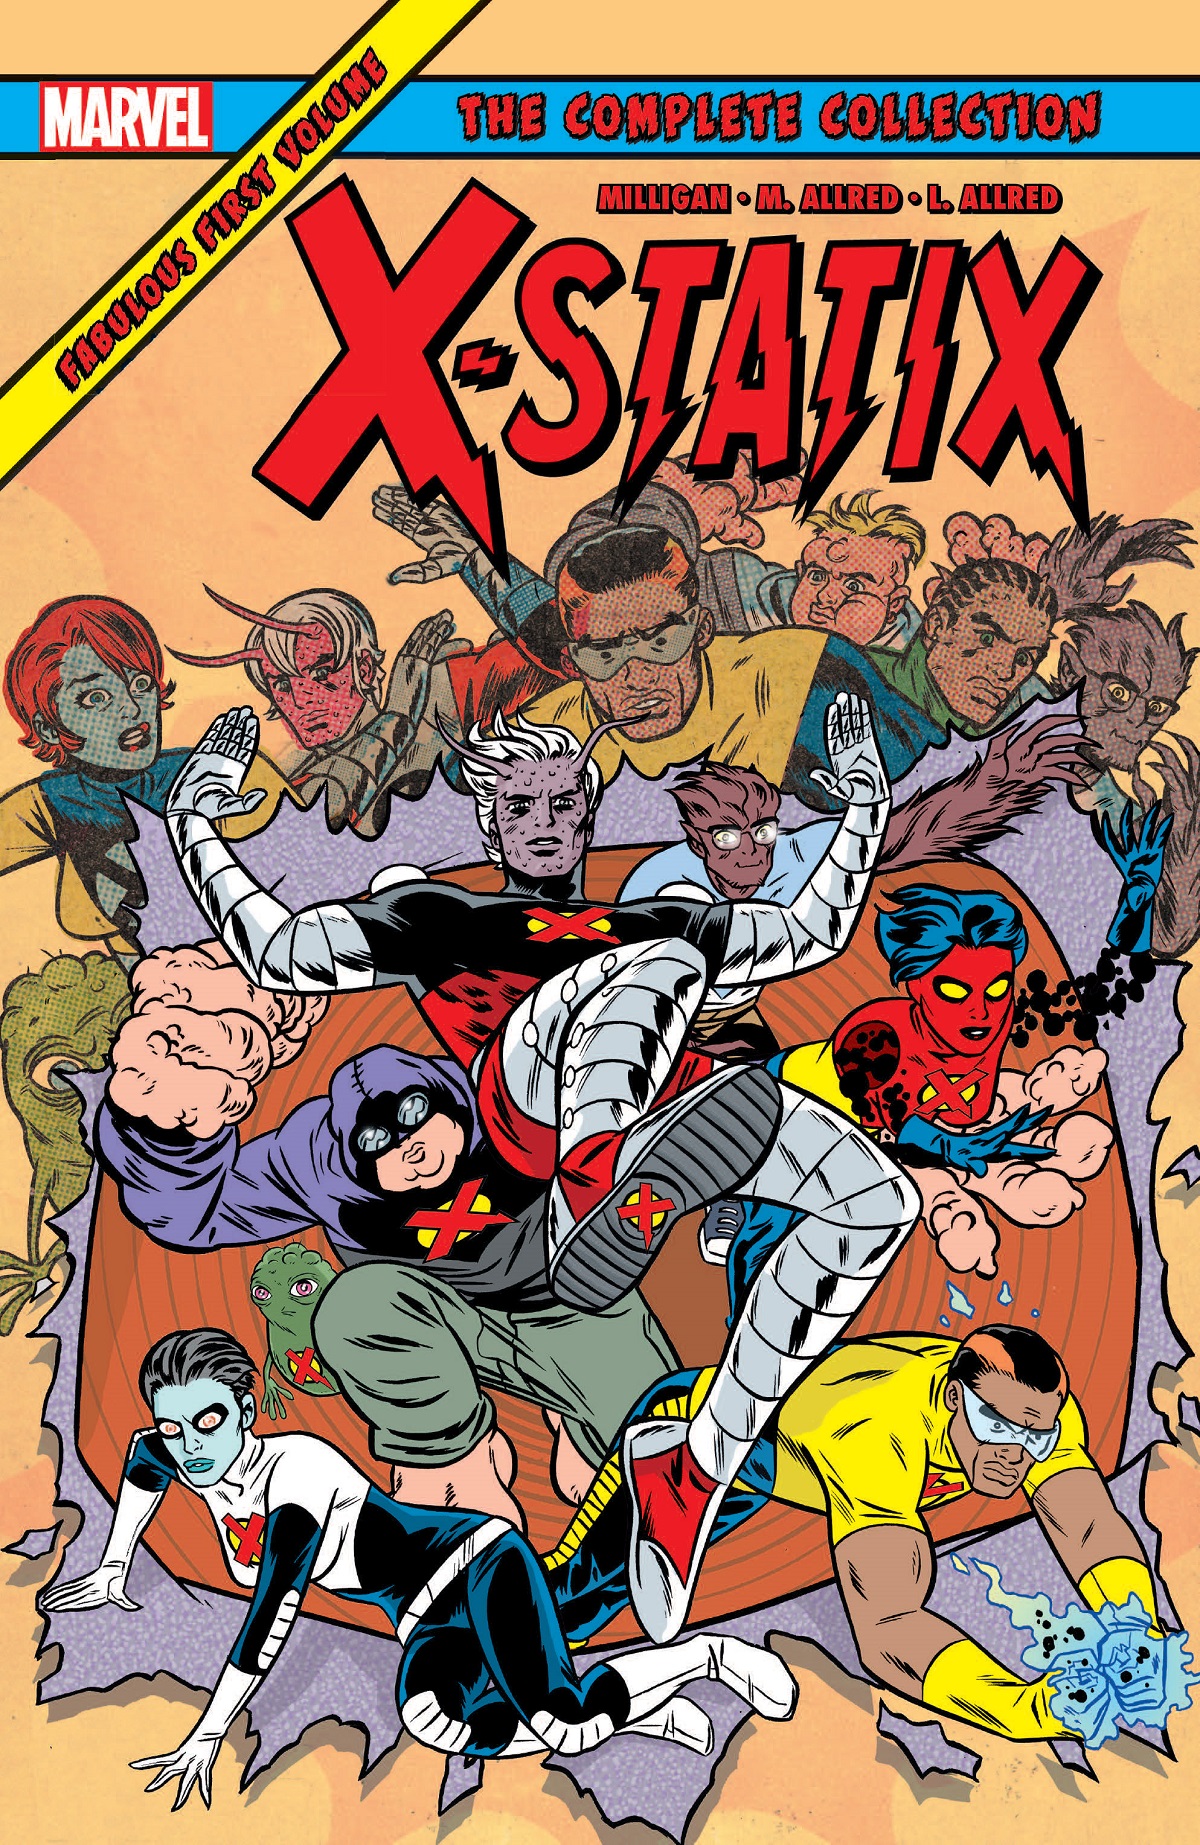 X-Statix: The Complete Collection Vol. 1 (Trade Paperback)